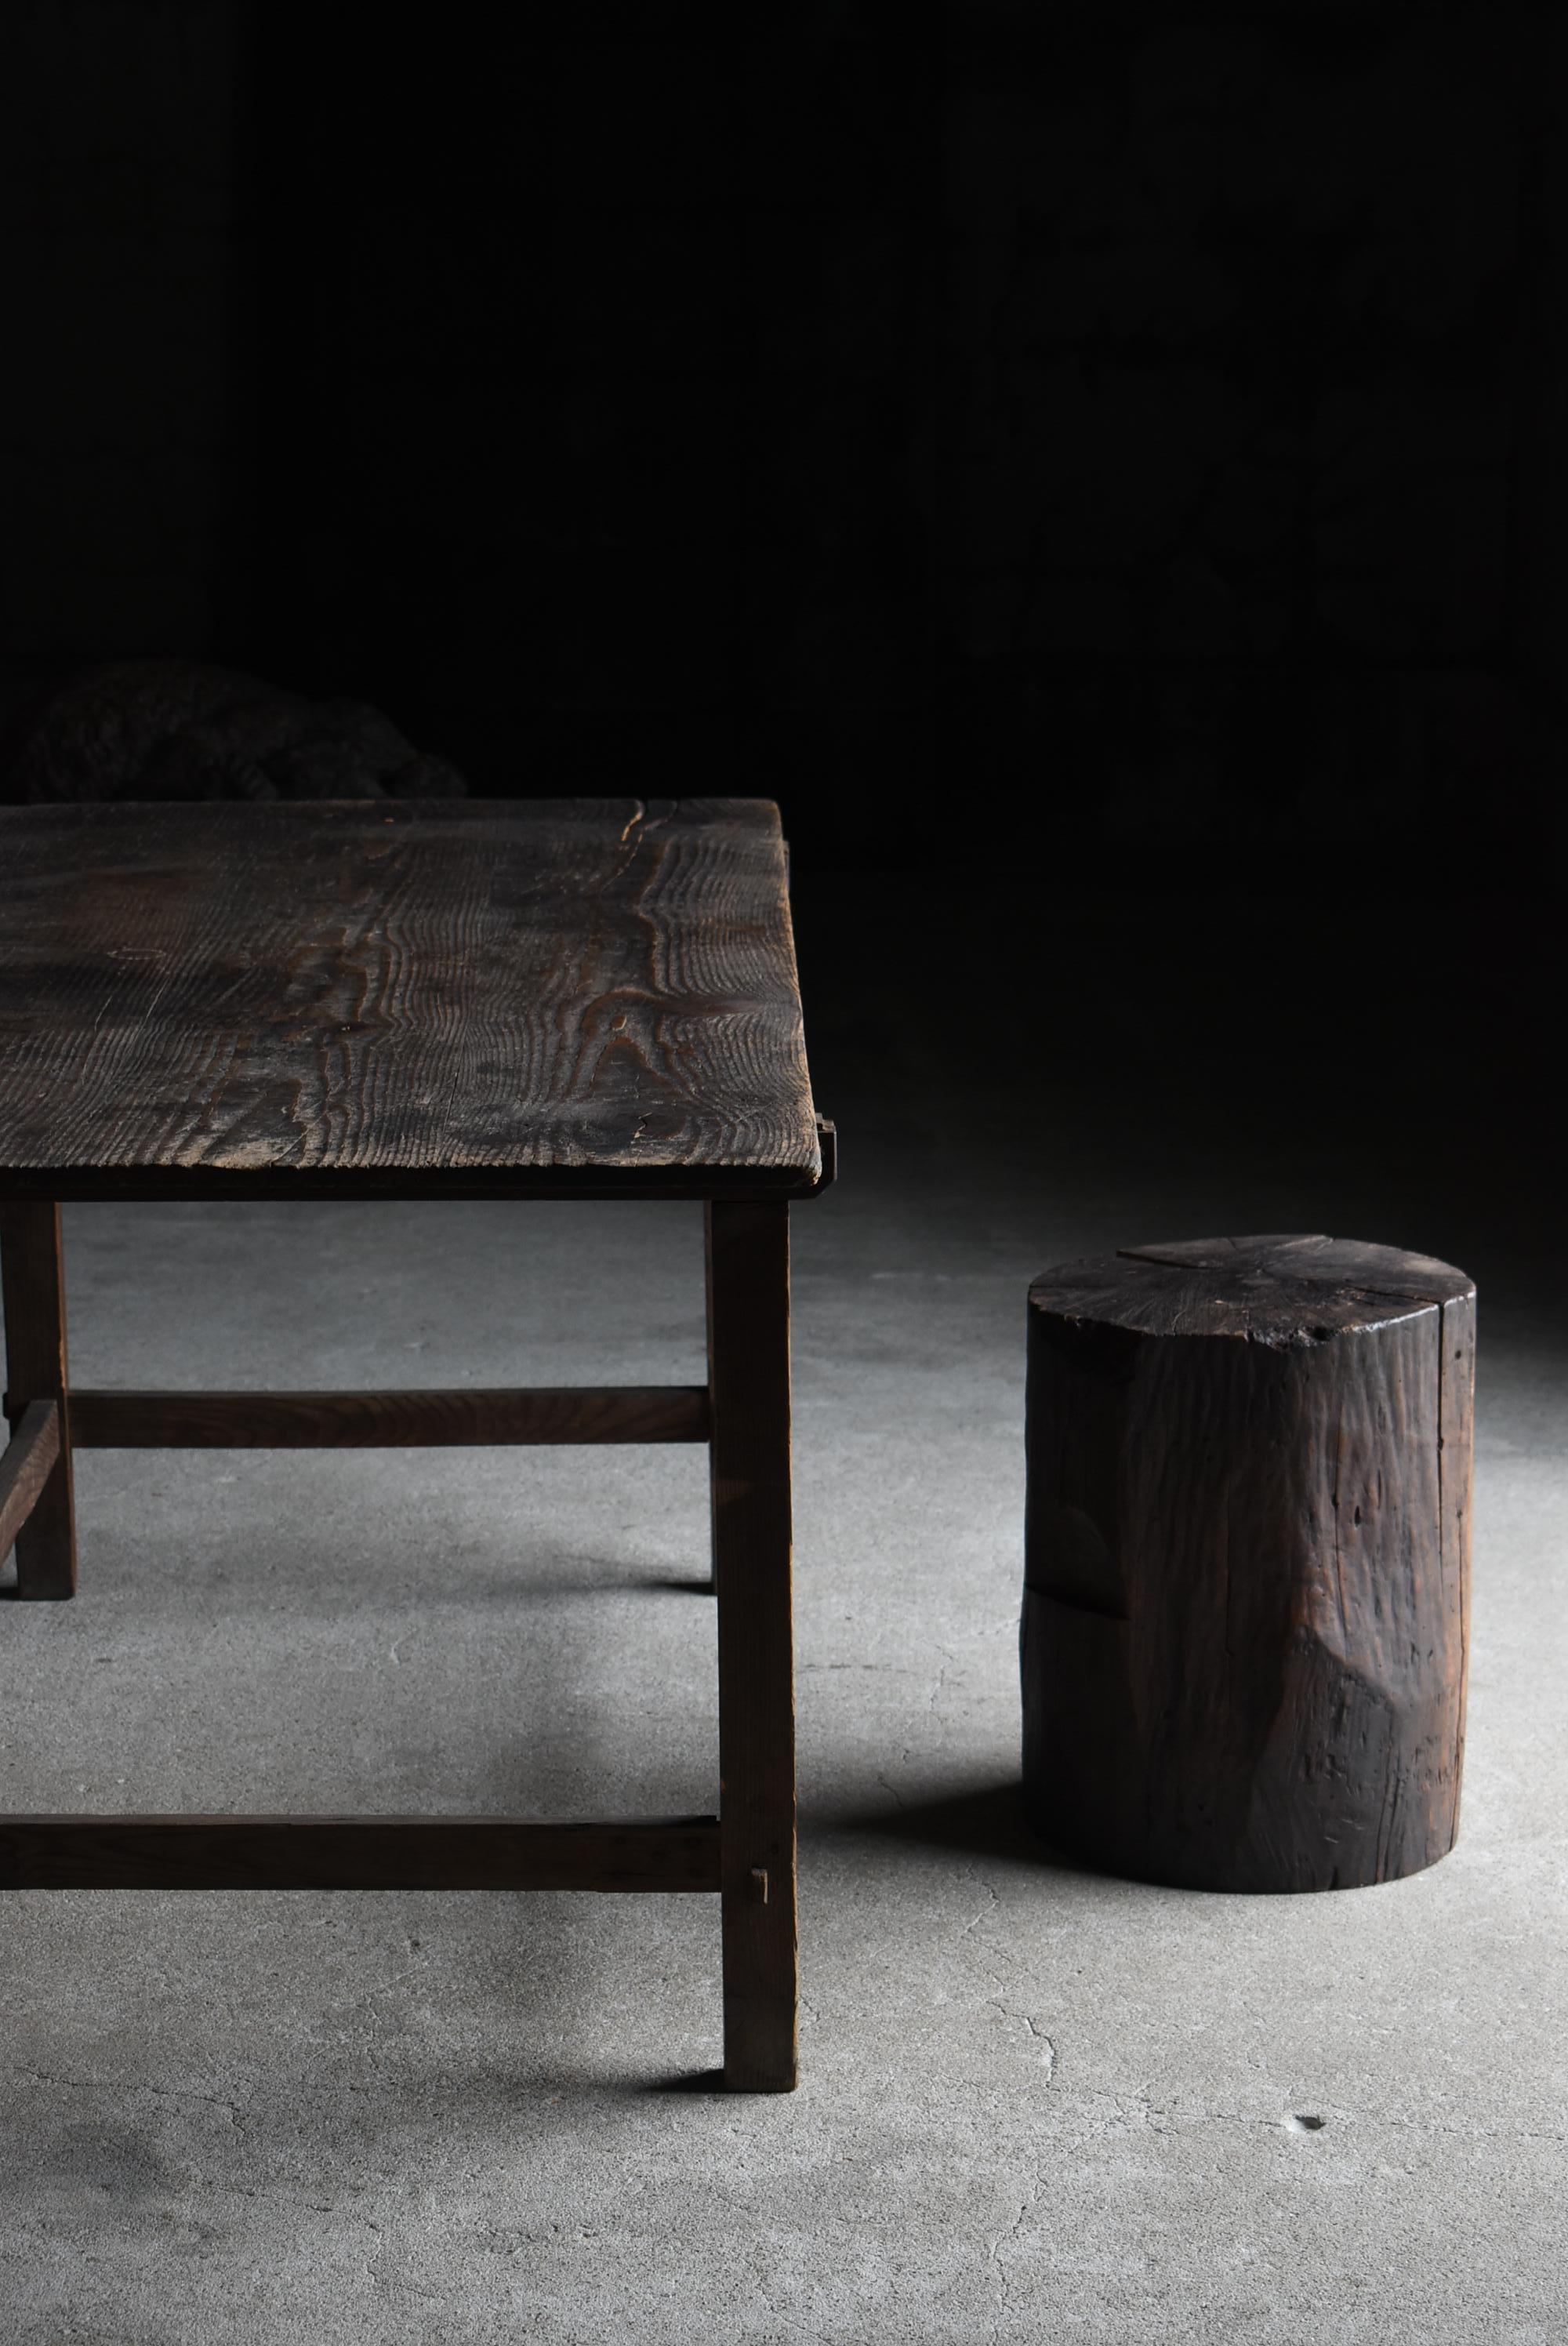 This is a very old Japanese stump stool.
It is from the Meiji period (1860s-1900s).
It is carved from a large walnut tree.

The cracks in the wood also accentuate the stool, giving it a strong and dynamic impression.
The long passage of time has